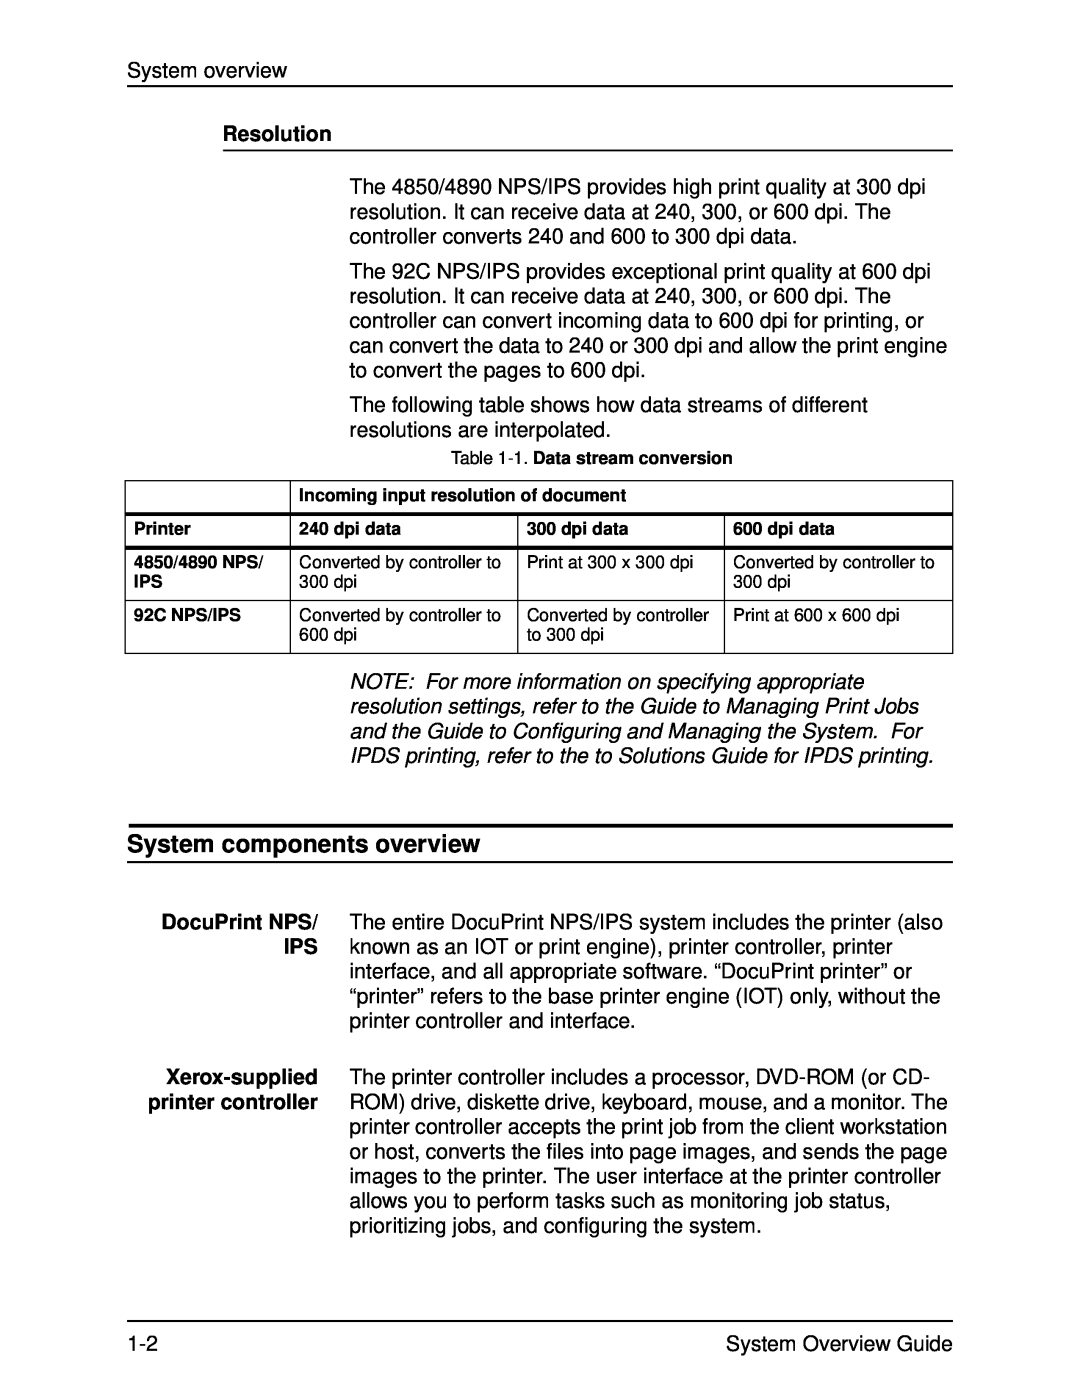 Xerox IPS, NPS, 4890, 4850, 92C manual System components overview, Resolution 